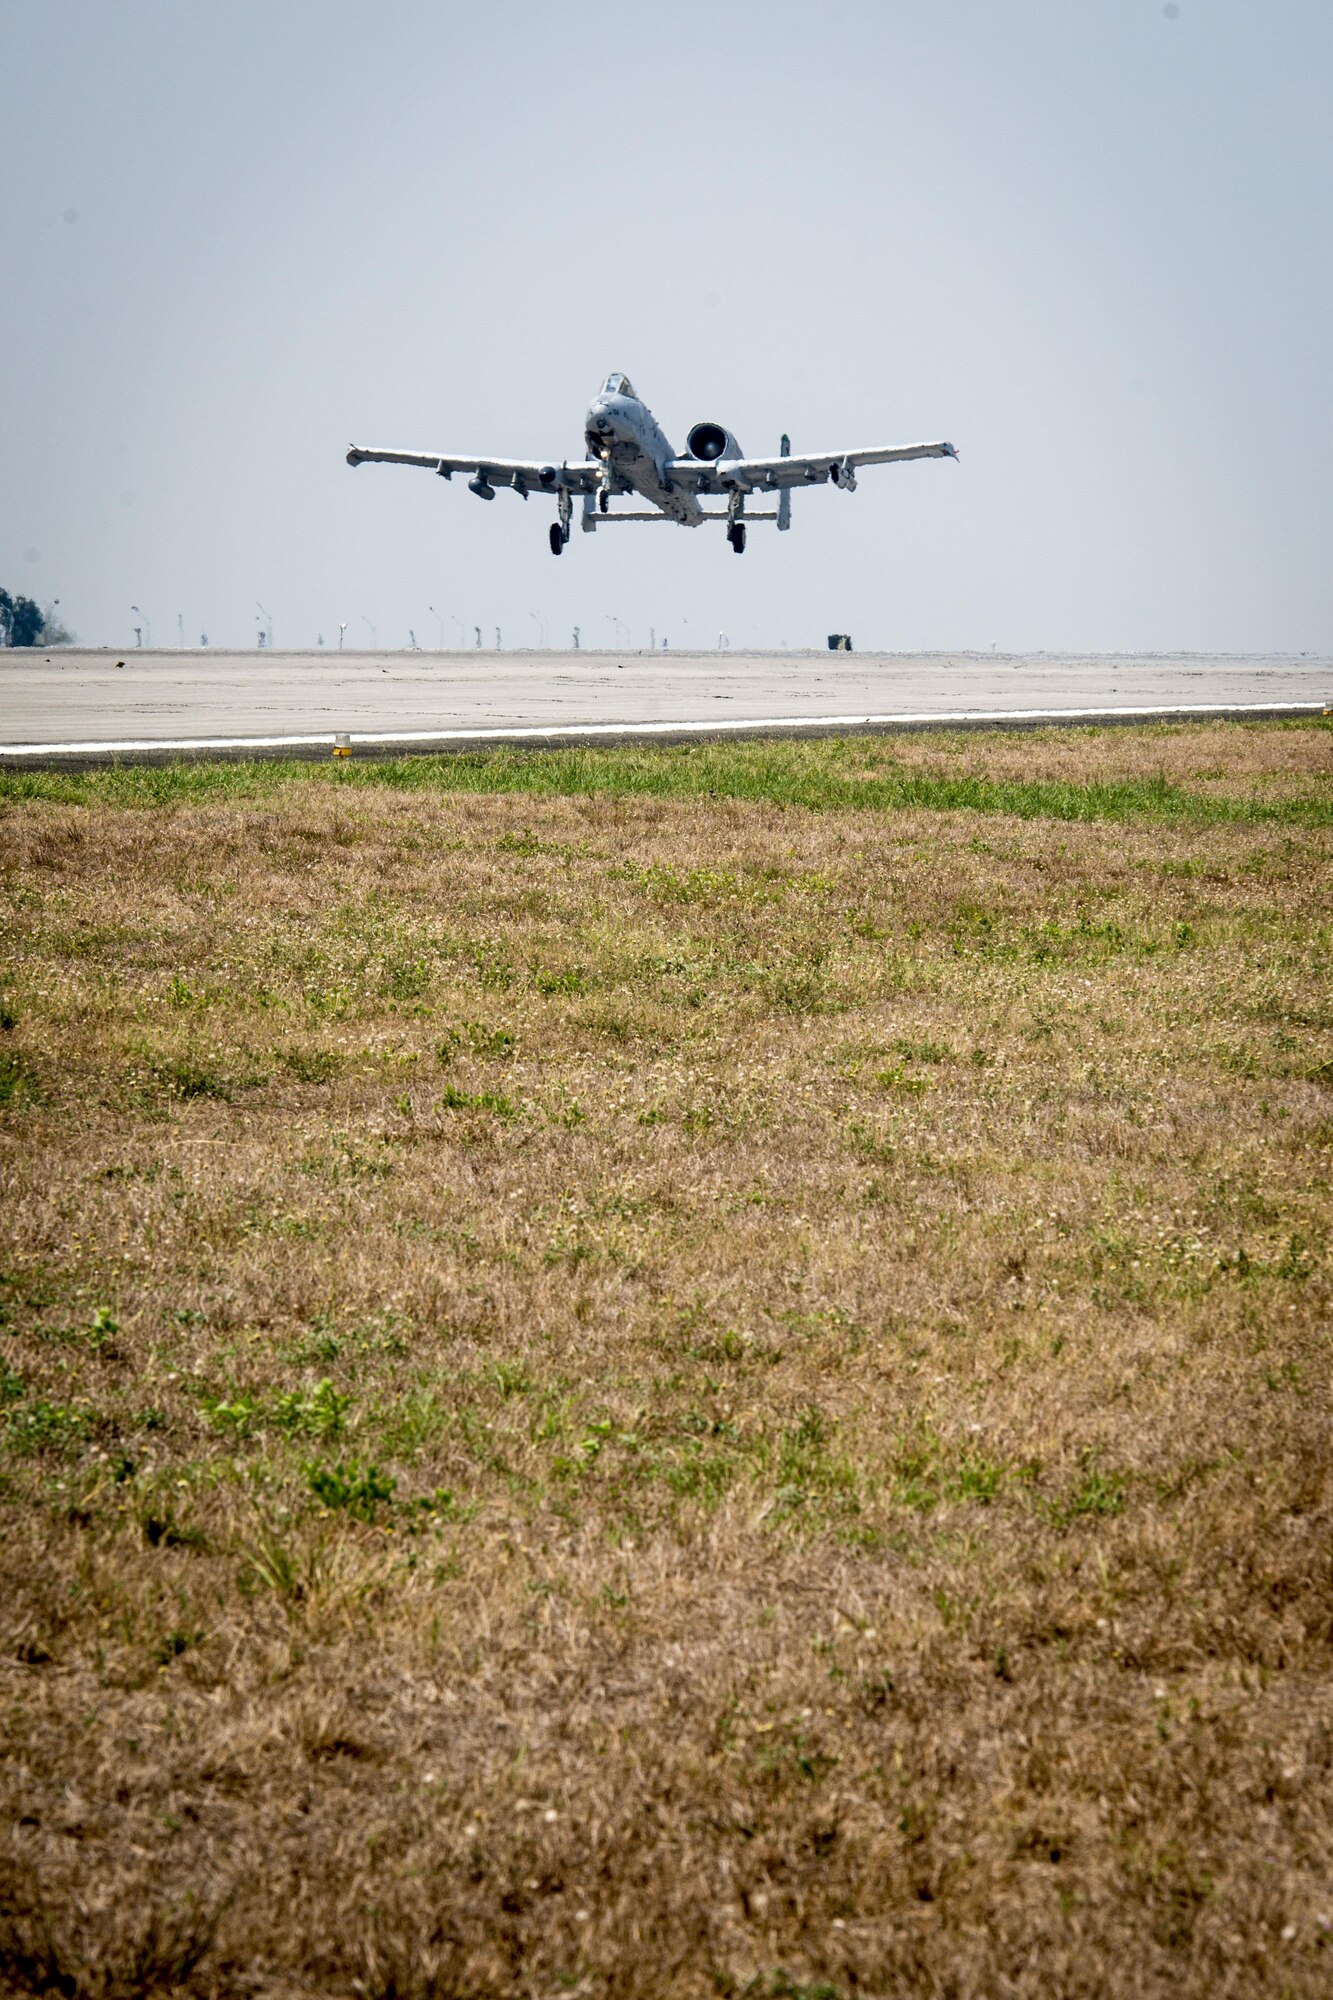 A U.S. Air Force A-10C Thunderbolt II, with the 51st Fighter Wing, Osan Air Base, Republic of Korea, takes off from Clark Air Base, Philippines, April 28, 2016. The A-10Cs flew their last U.S. Pacific Command Air Contingent mission as this iteration comes to a close. The A-10C has a proven record operating out of short and varying airstrips, provides a flexible range of capabilities, and has a mission profile consistent with the air and maritime domain awareness operations the U.S. Pacific Command’s Air Contingent is conducting out of the air base. (U.S. Air Force photo by Staff Sgt. Benjamin W. Stratton)